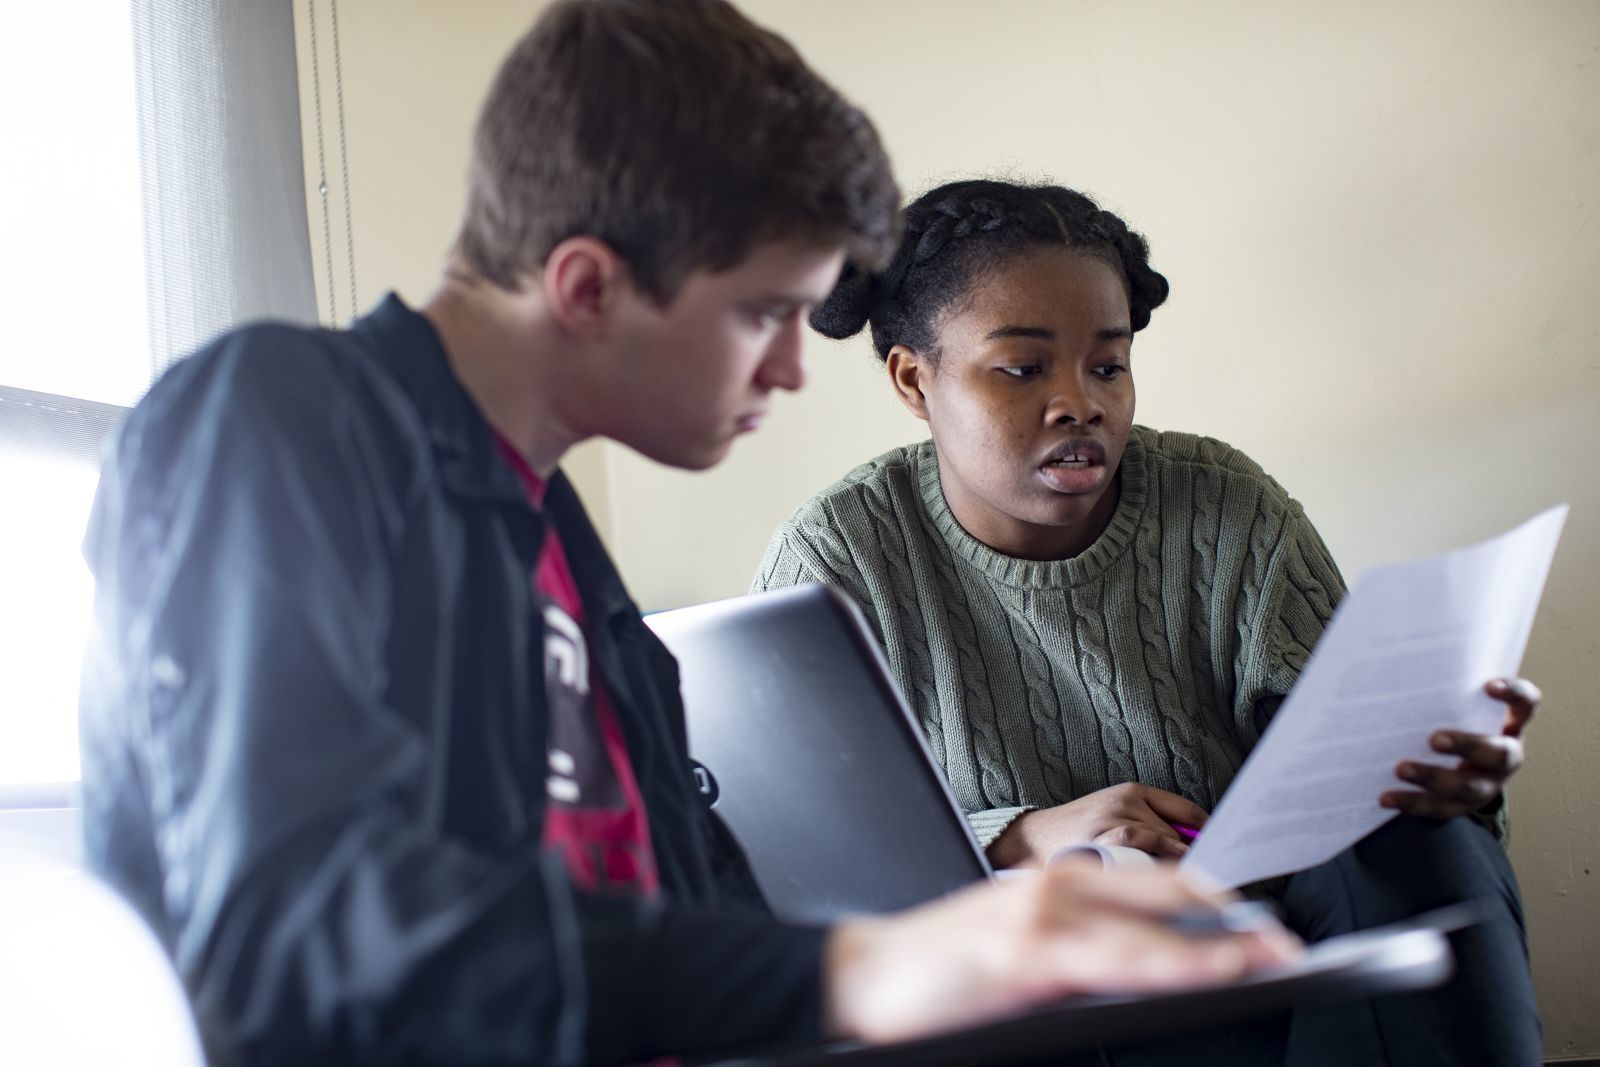 Two students look at a paper while sitting at desks in a classroom.